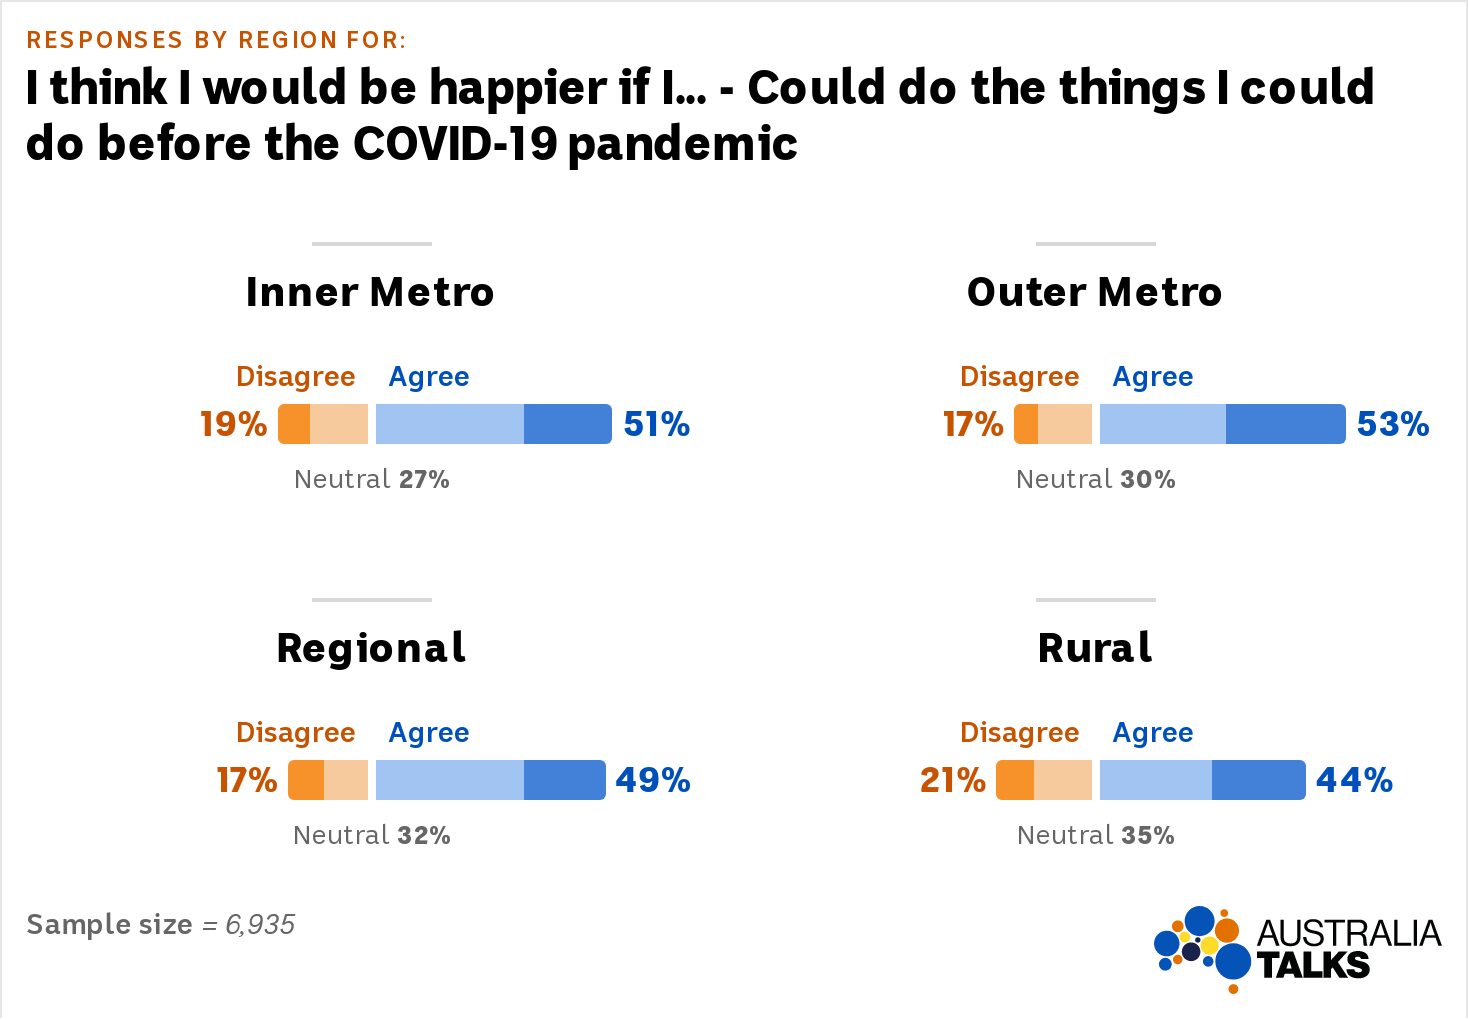 agreement rates to the statement "I think I would be happier if I could do the things I did before the COVID-19 pandemic".